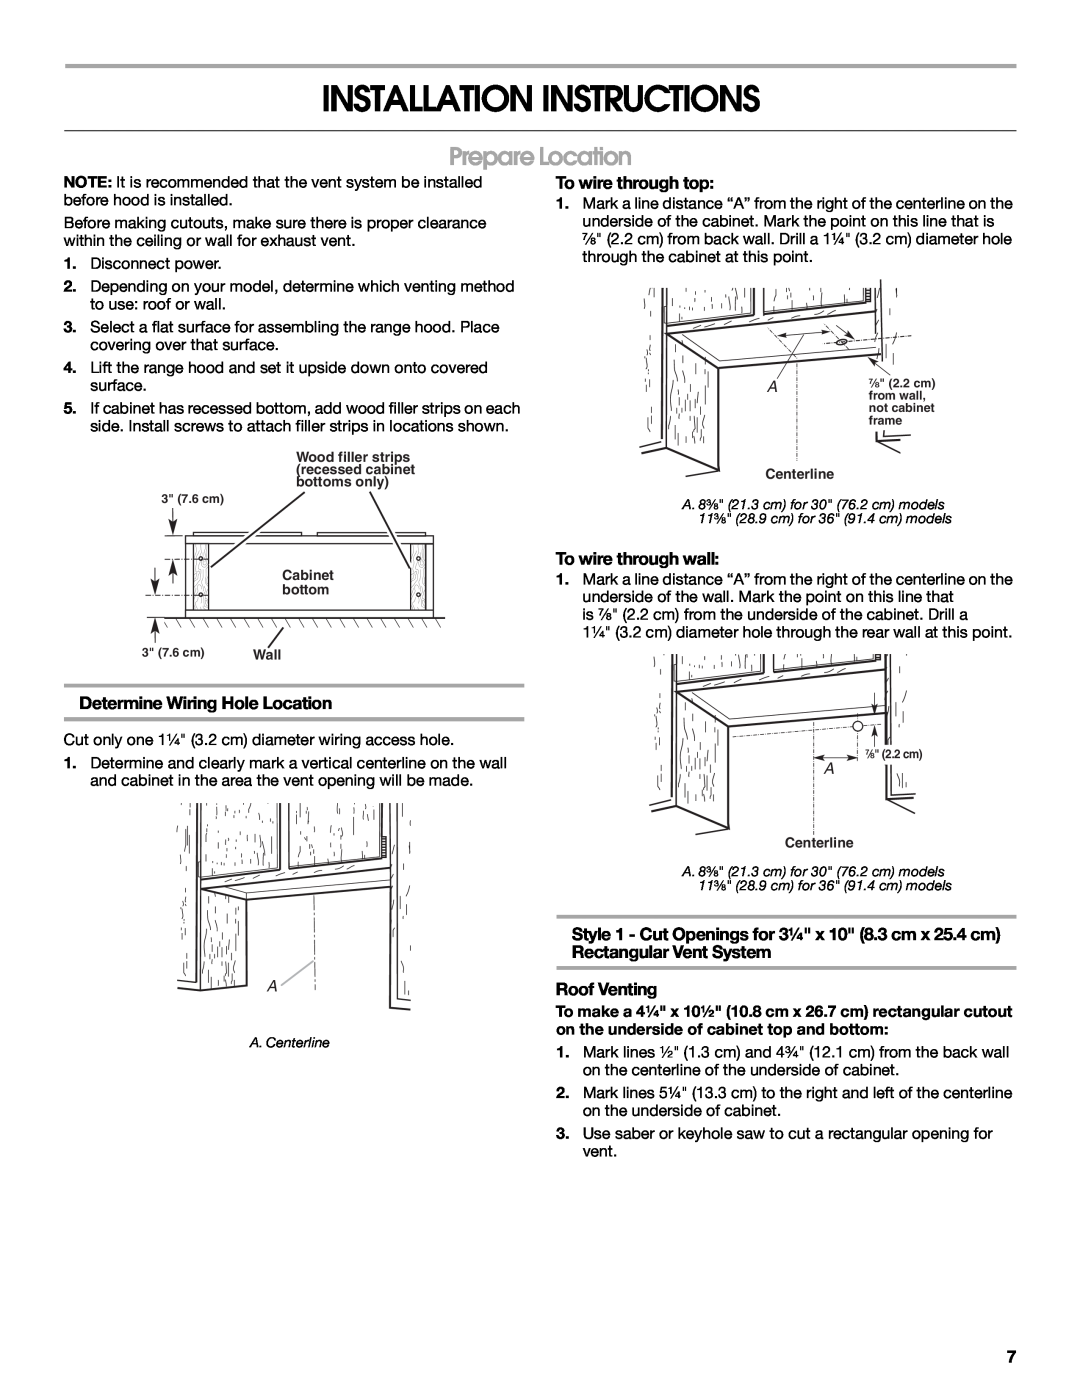 Whirlpool W10400321B Installation Instructions, Prepare Location, To wire through top, To wire through wall, Roof Venting 